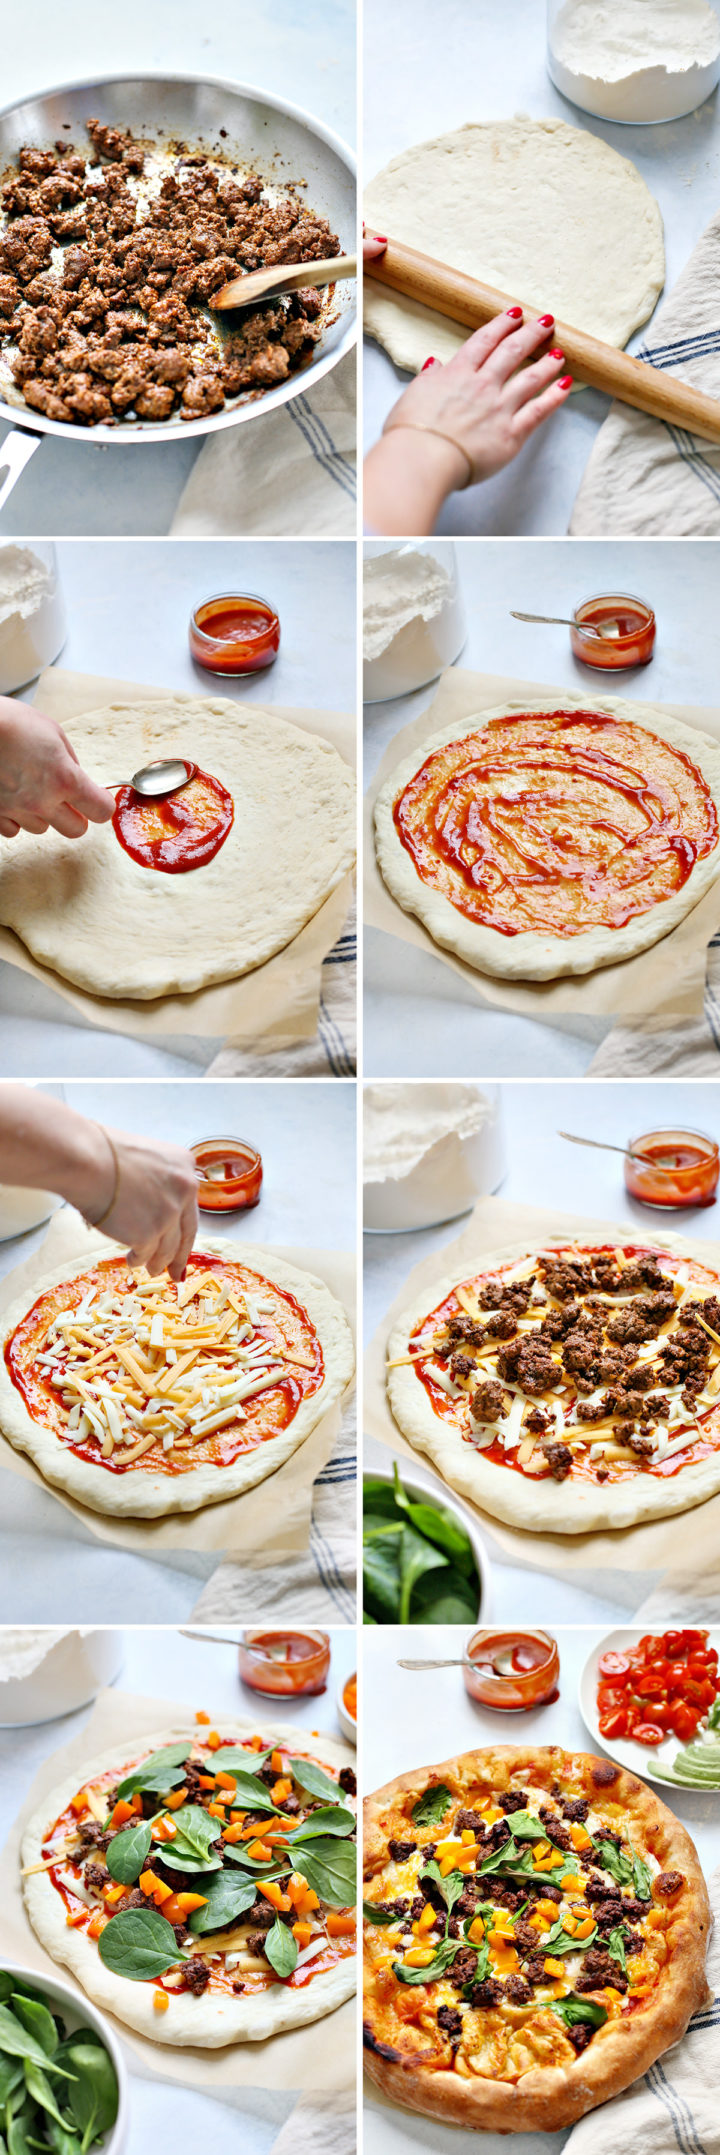 step by step photos showing how to make a taco pizza